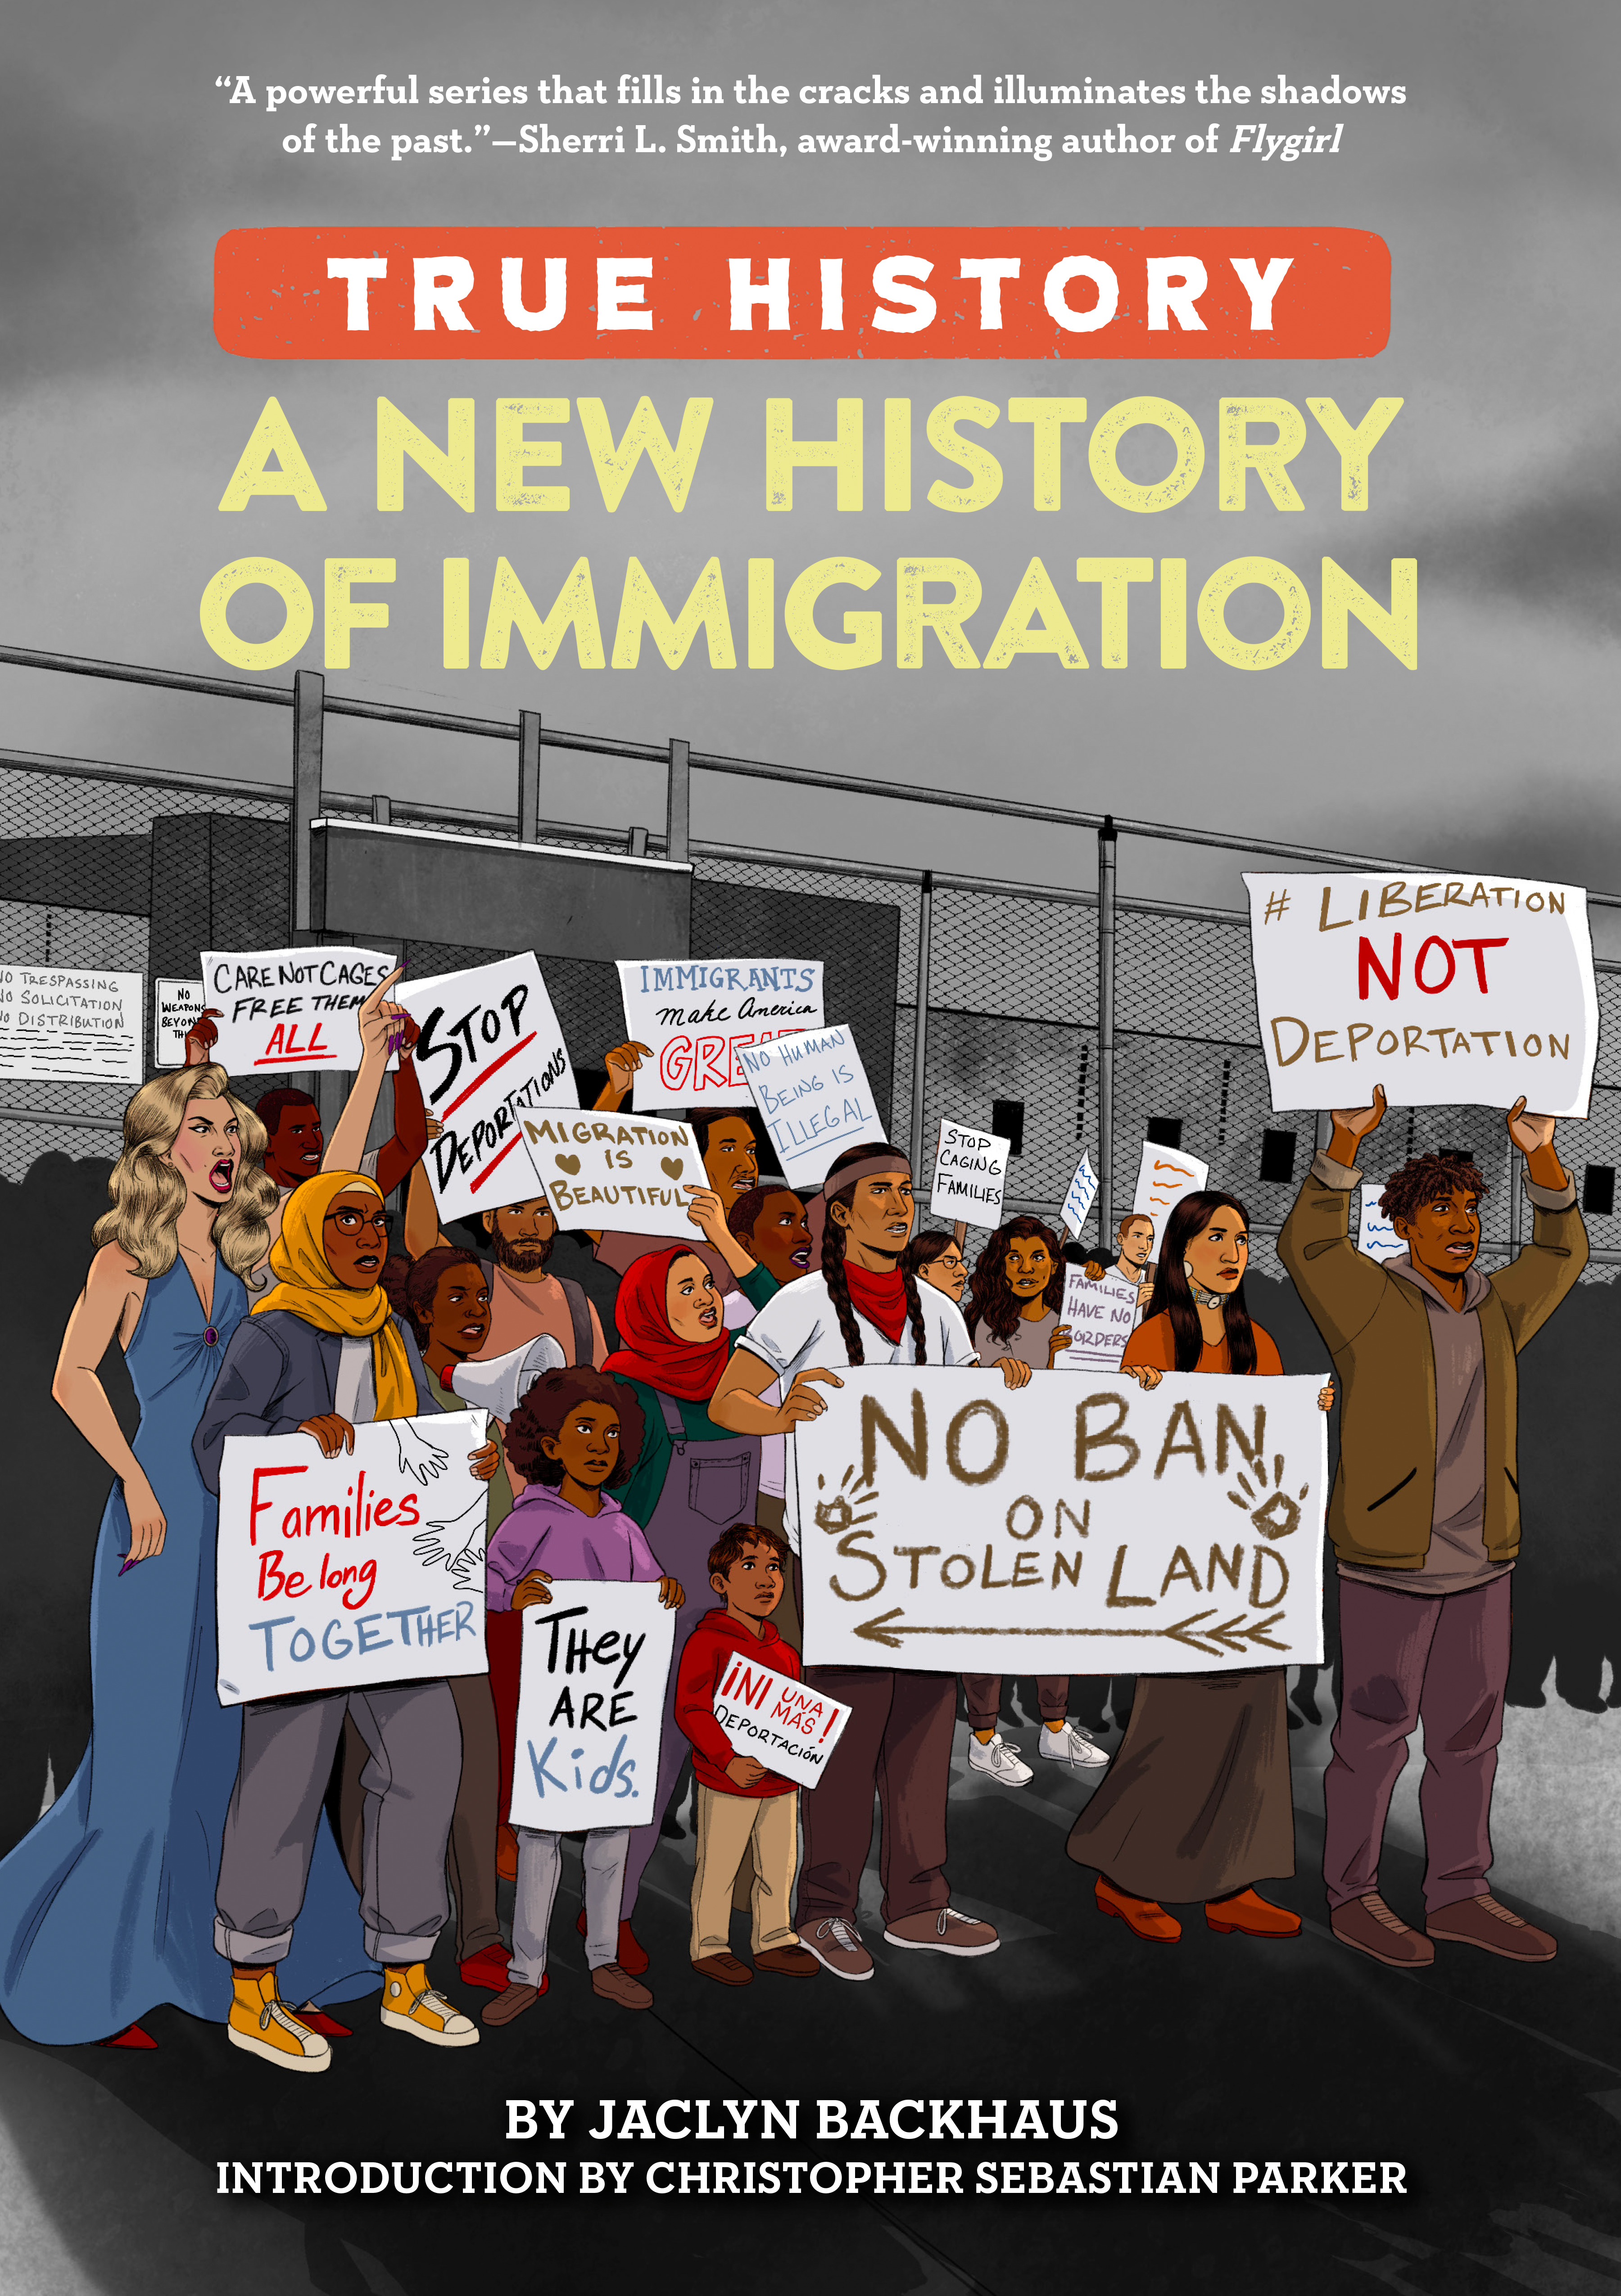 True History - A New History of Immigration | Documentary